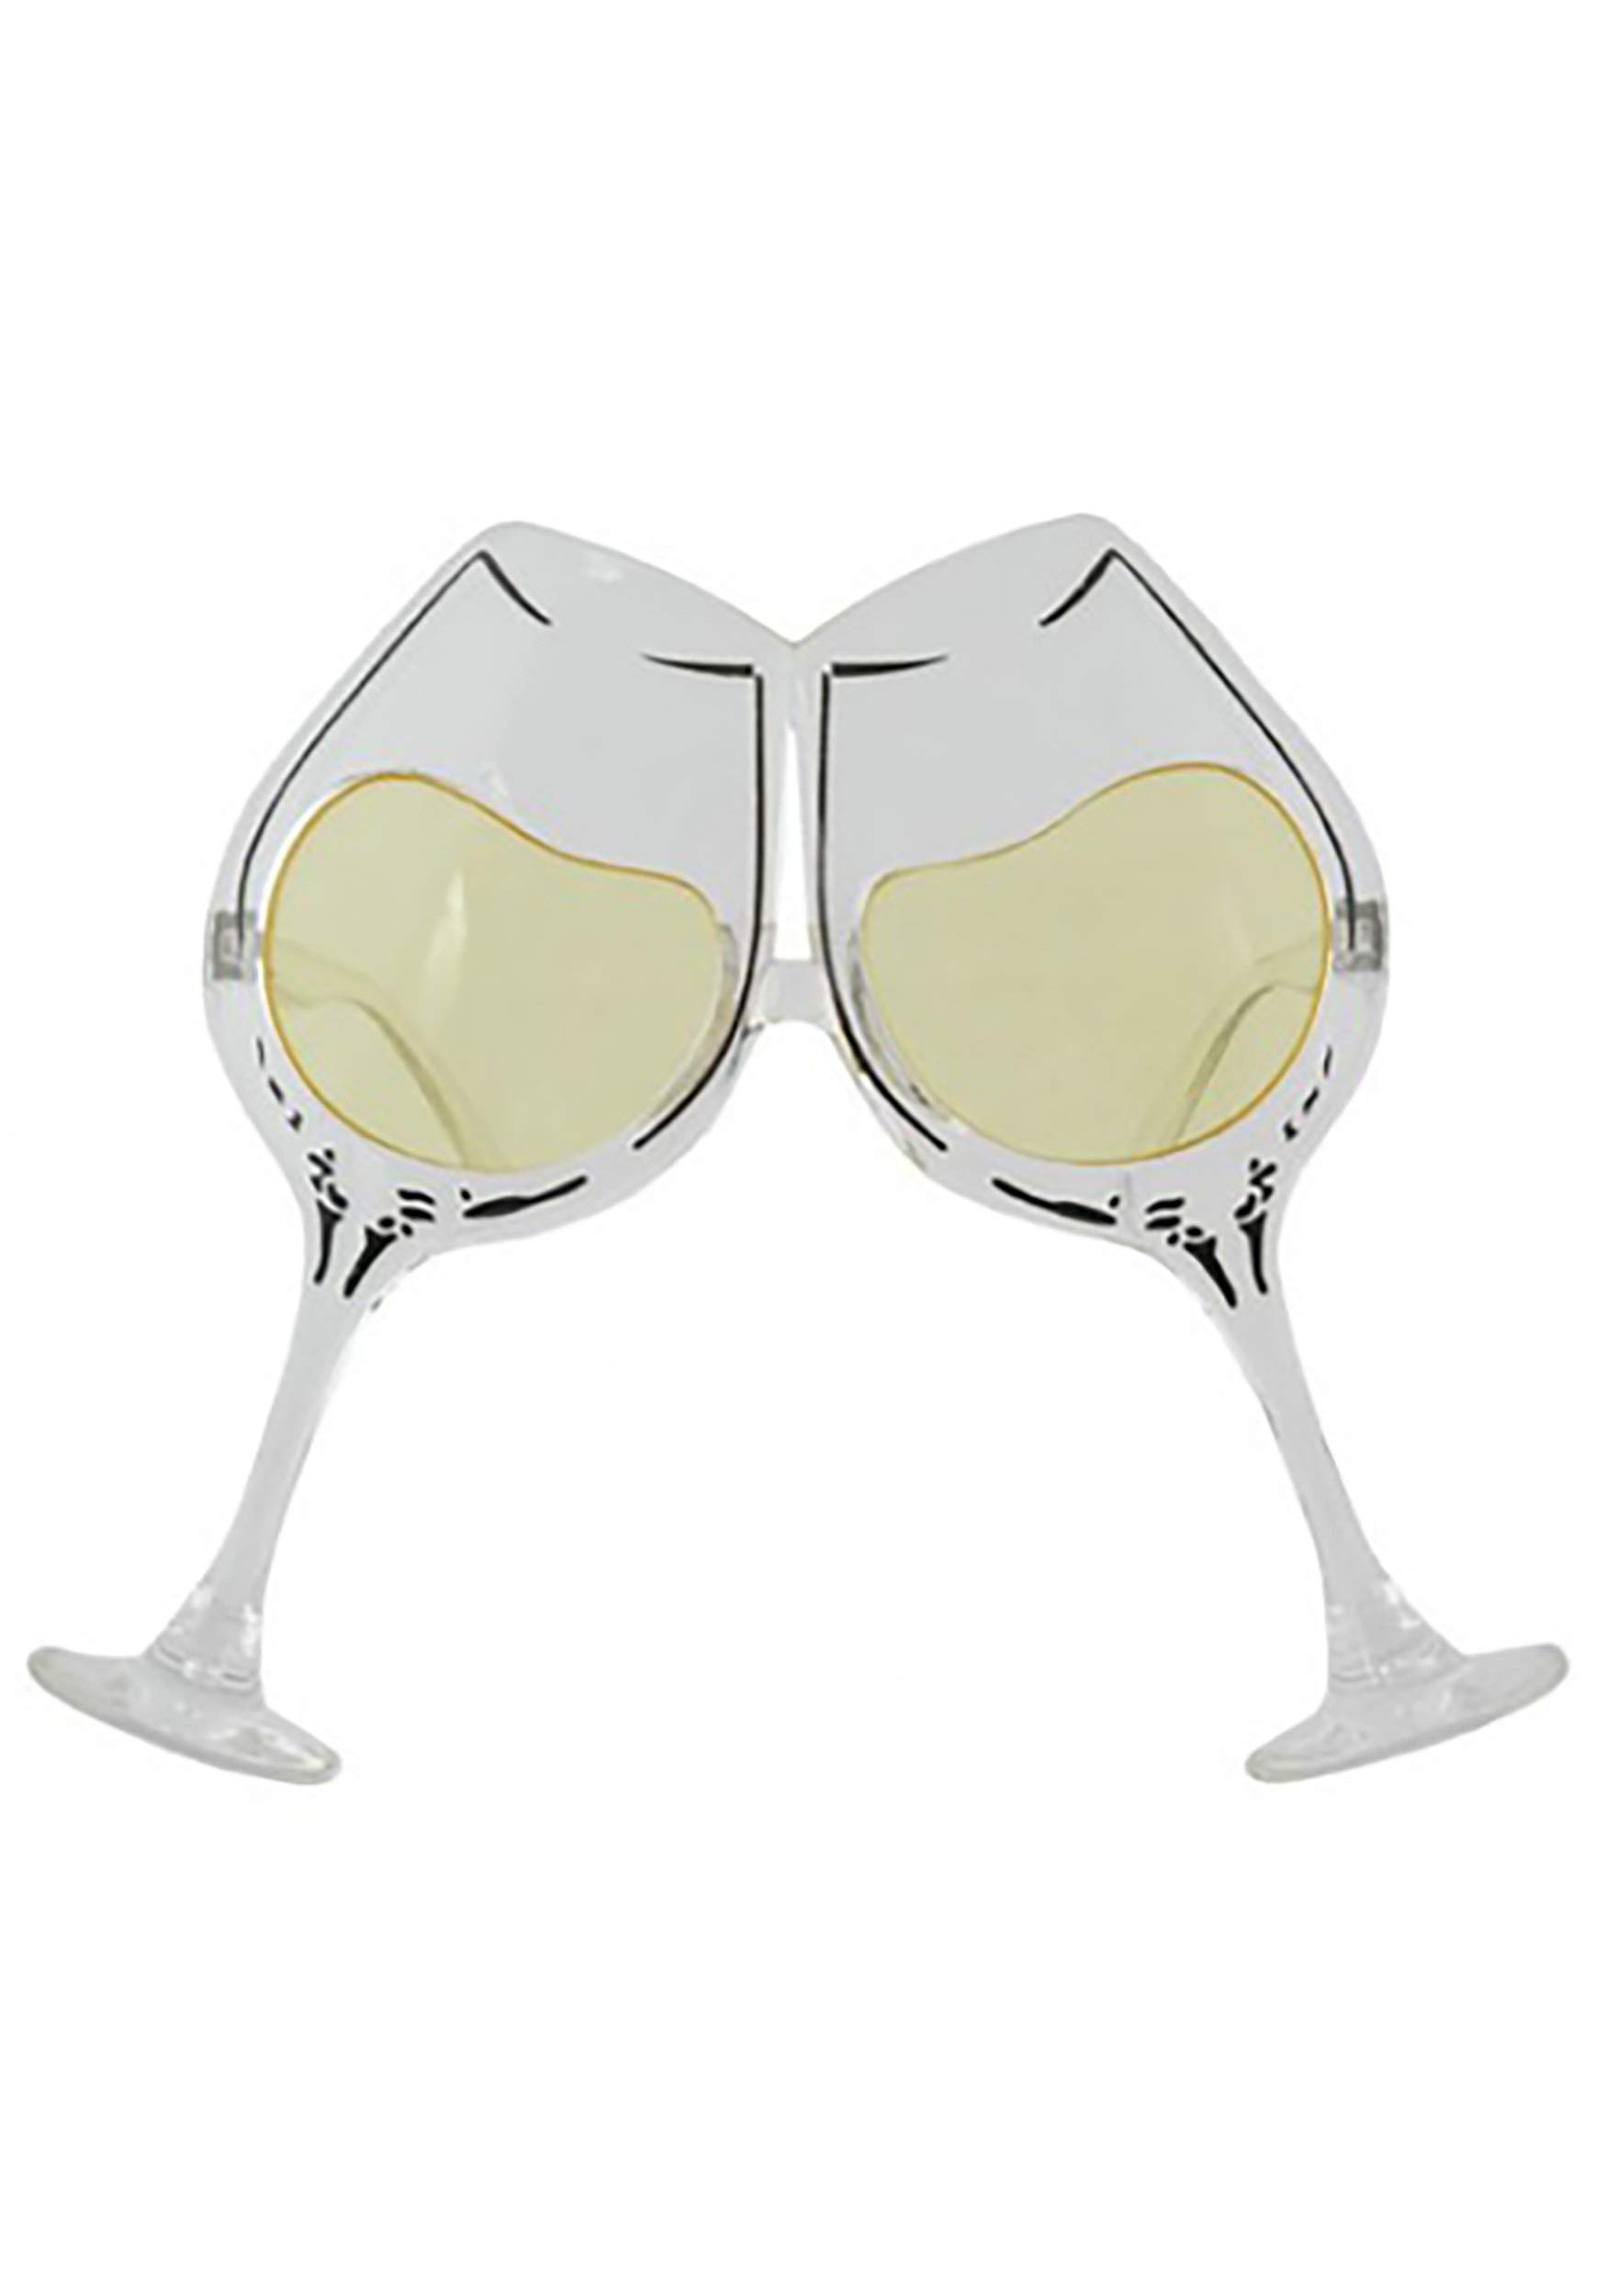 White Wine Glasses by elope